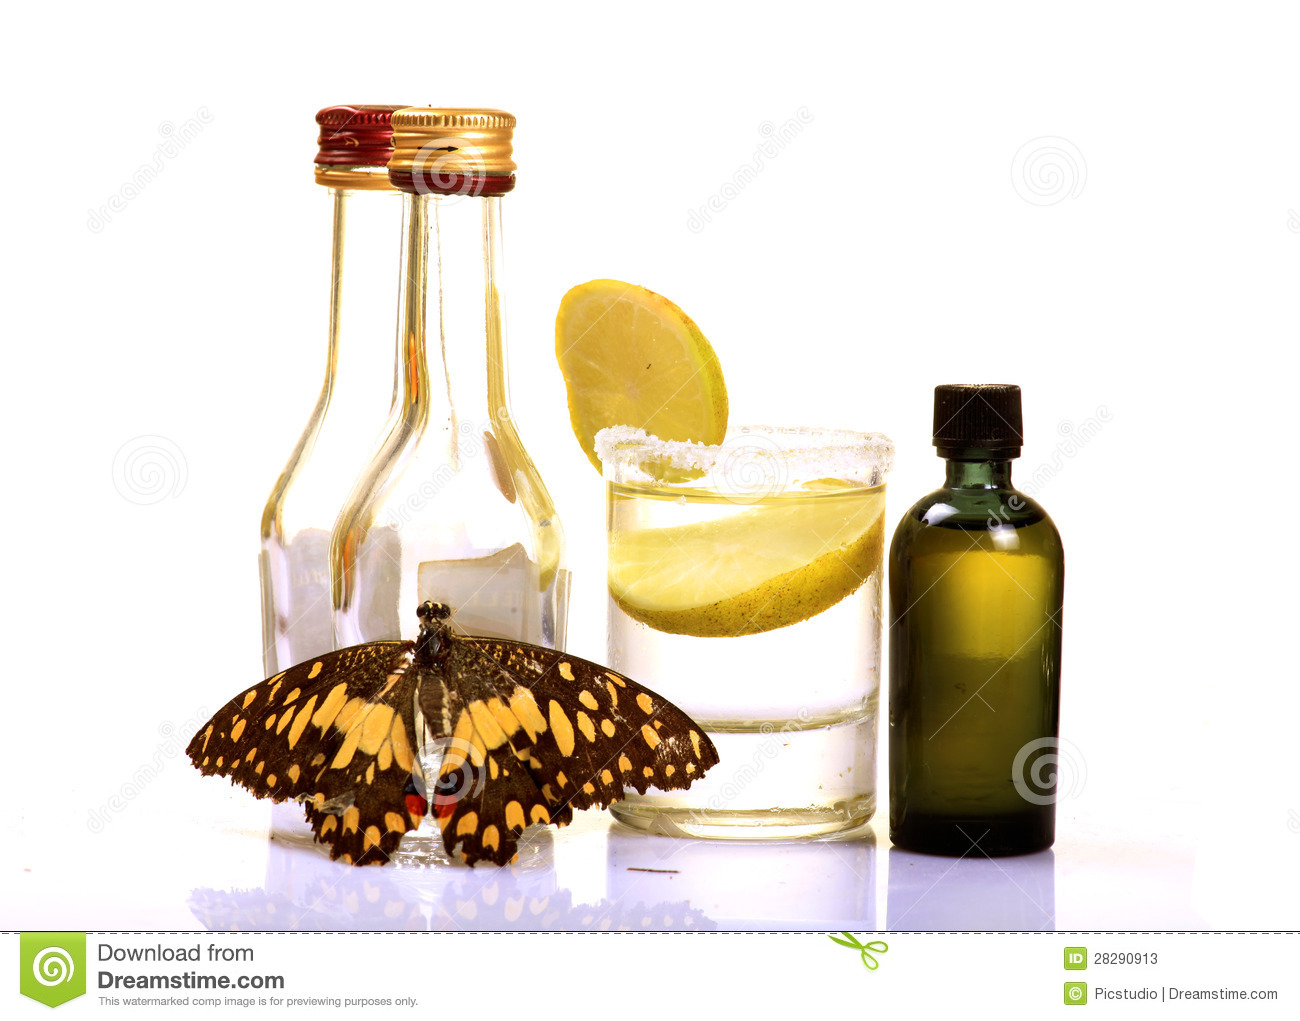 Tequila Shot Looking Beautiful Over White Background 